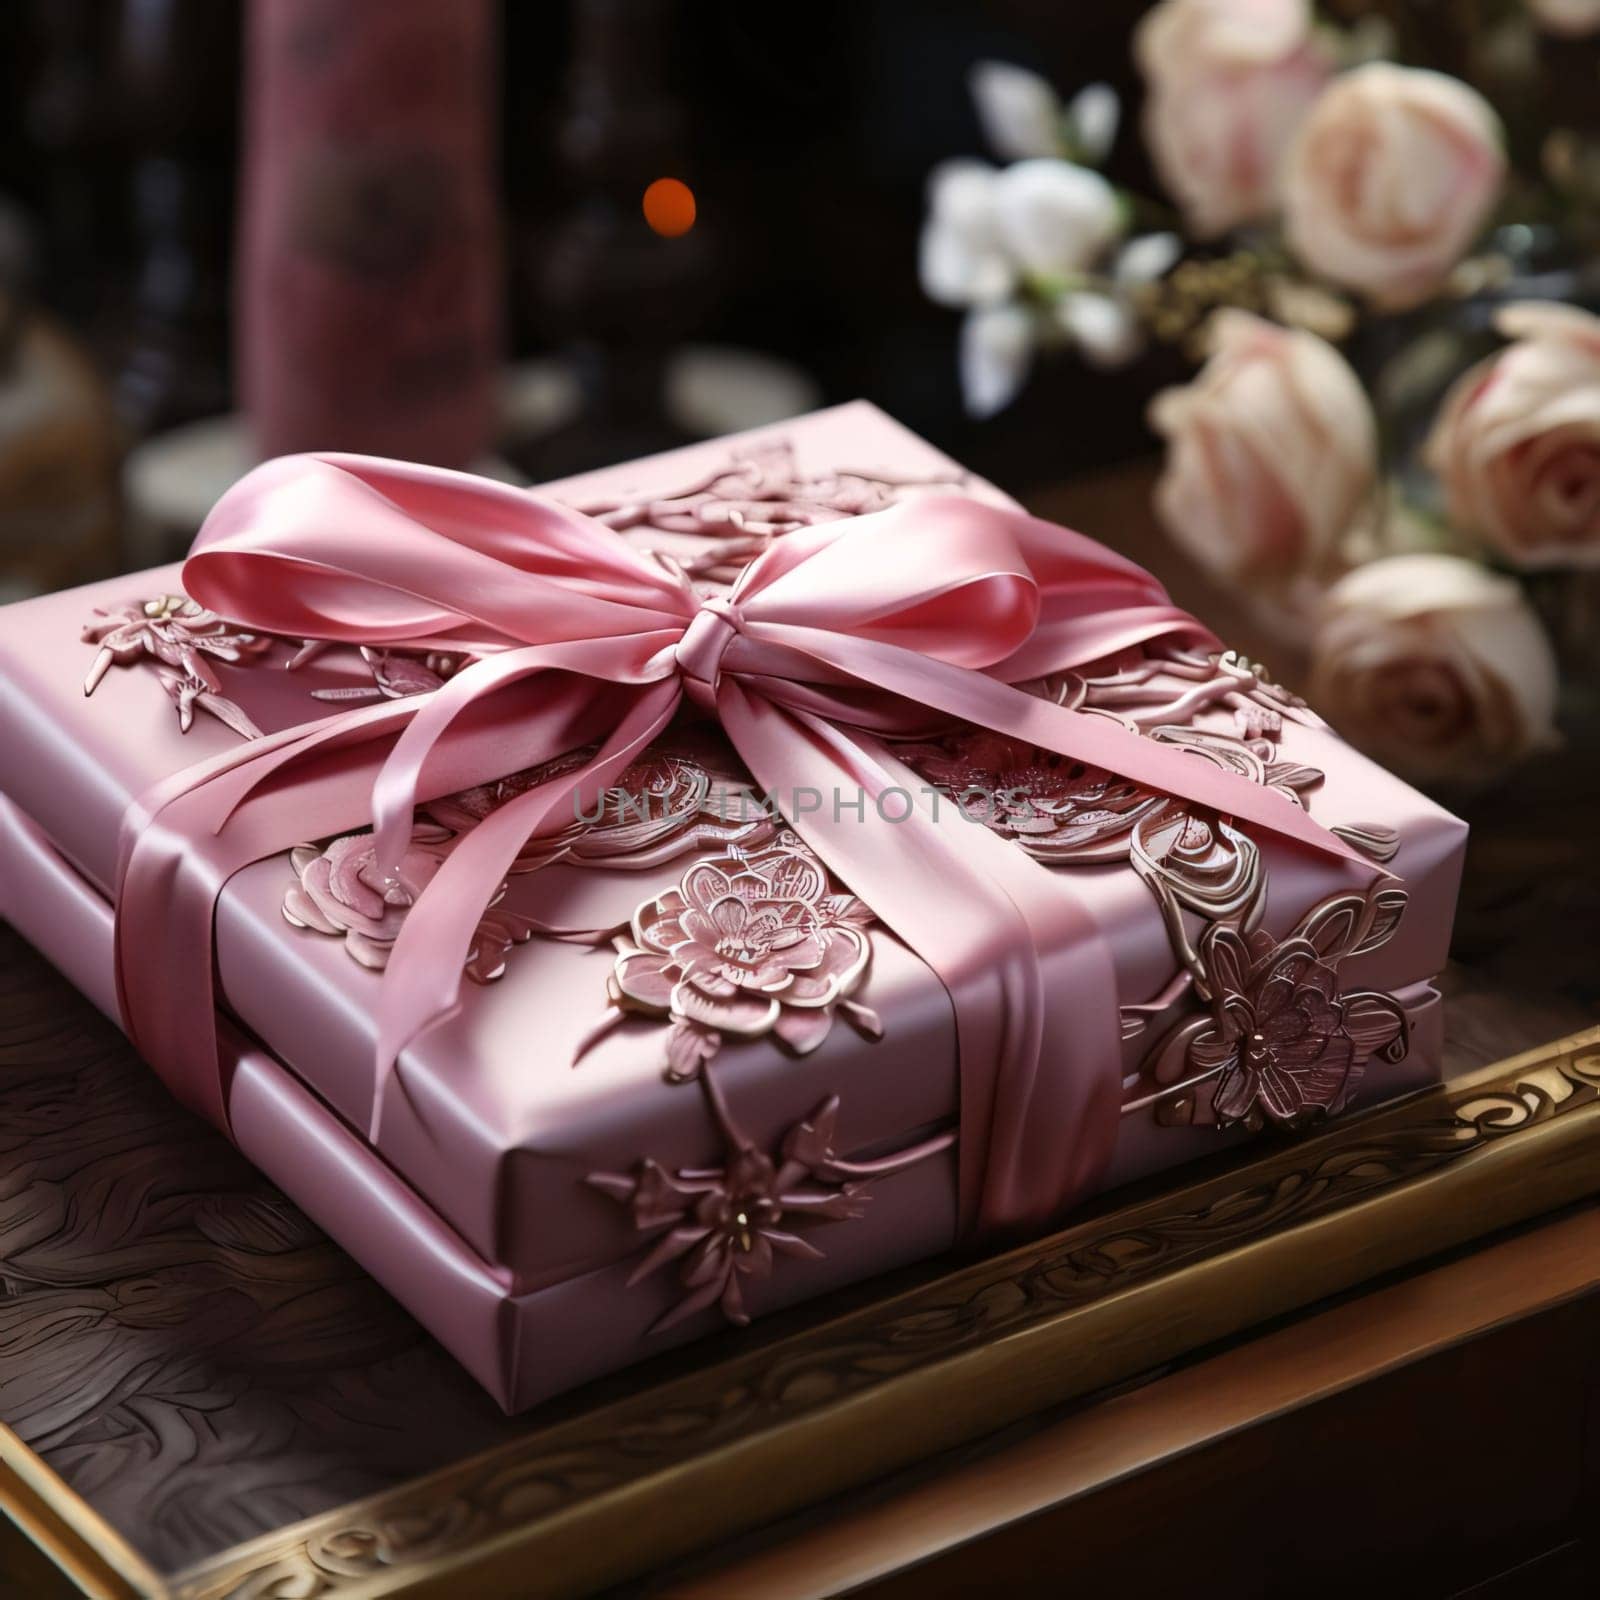 Pink gift with ornaments and pink bow in the background white roses. Gifts as a day symbol of present and love. A time of falling in love and love.